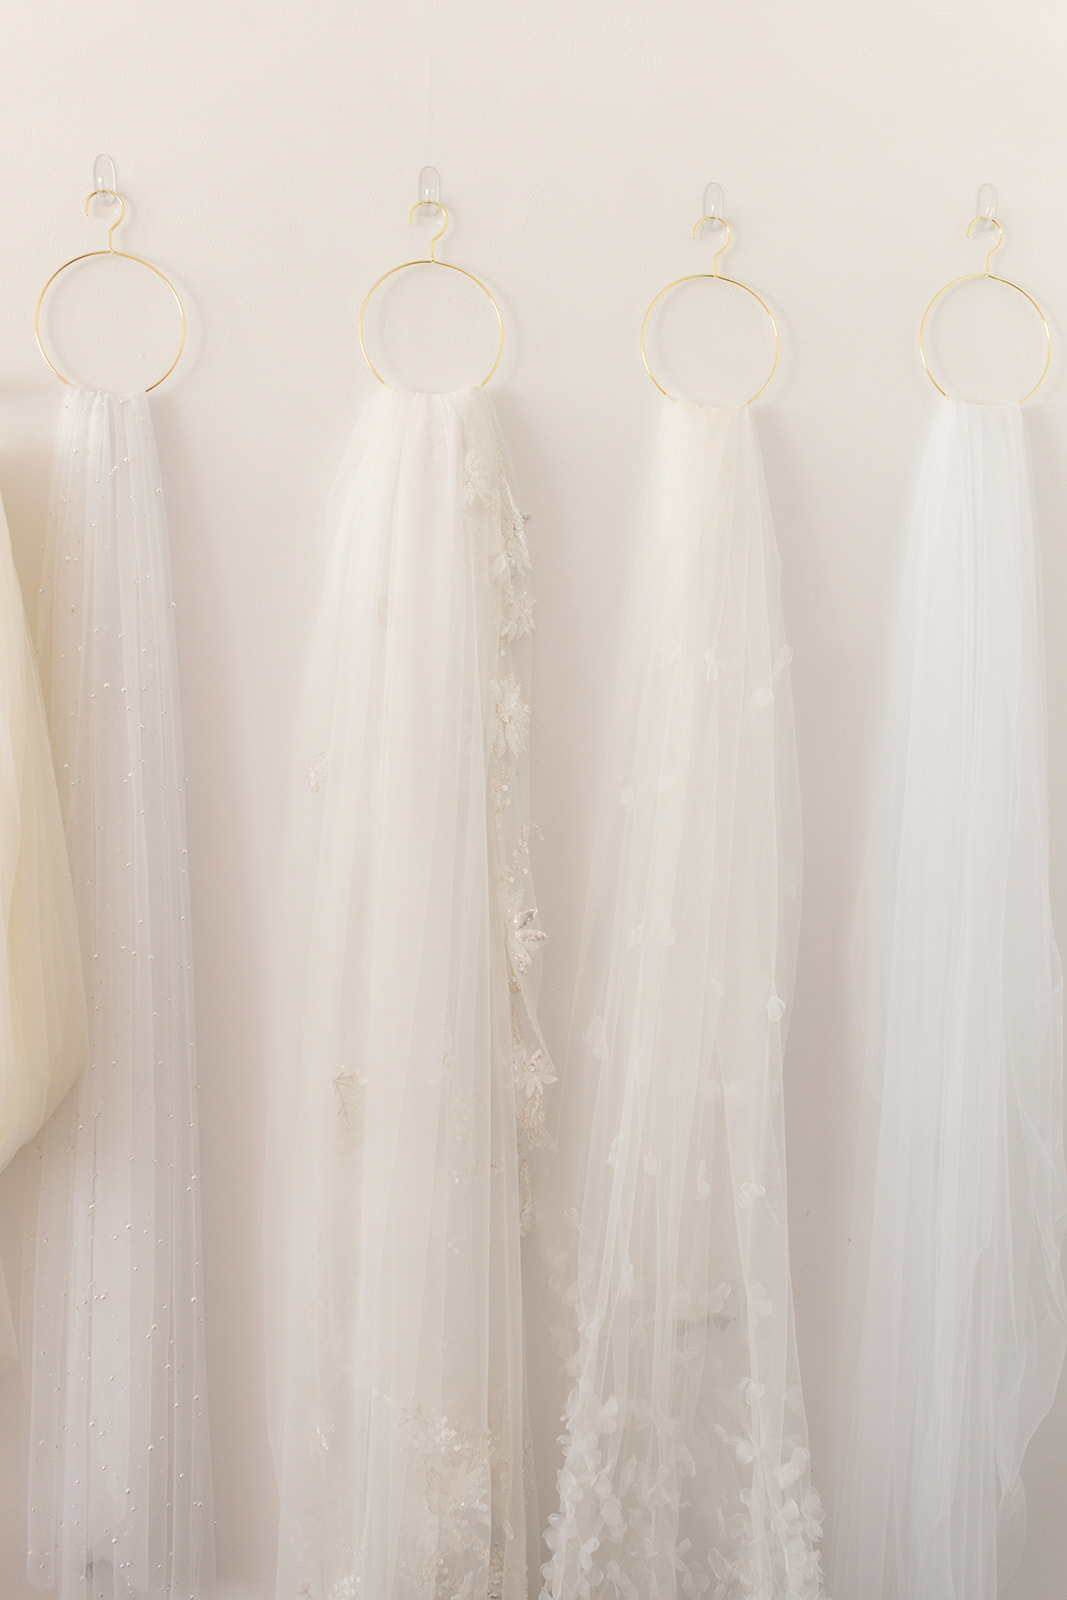 white bride dresses hanging on the wall